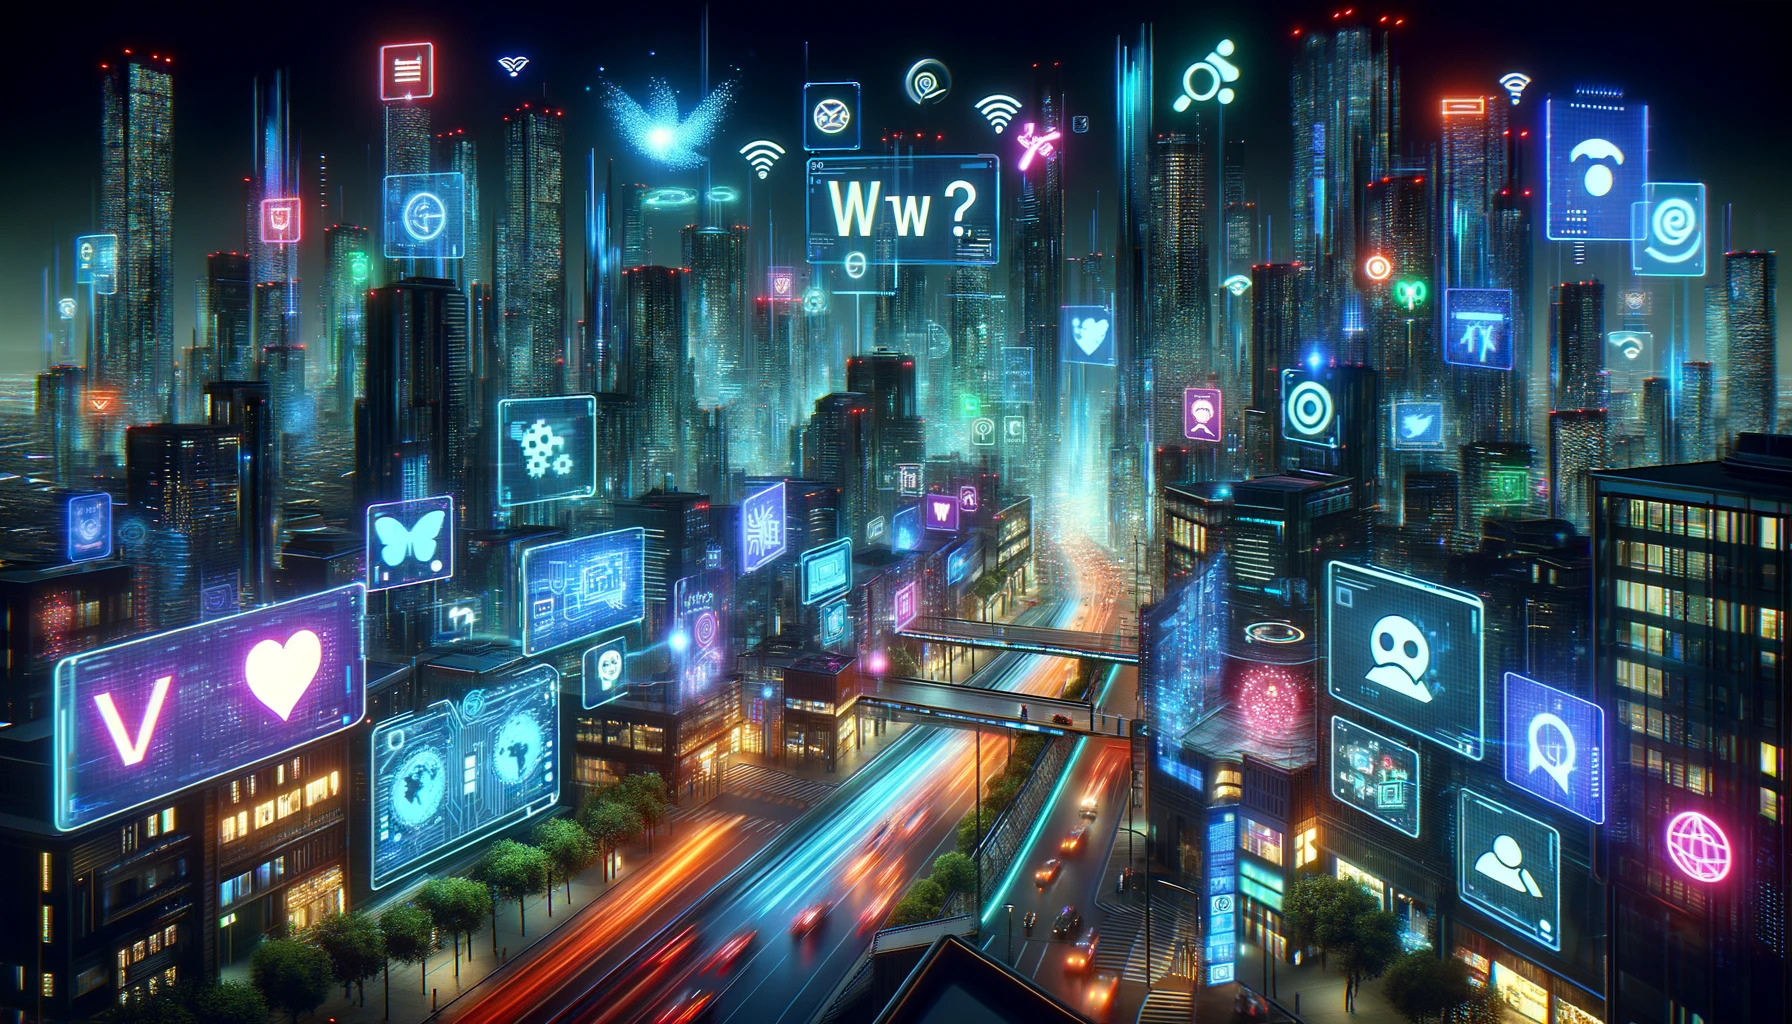 an image that captures the essence of "What's the Word?" (WTW) in a modern, digital landscape, illustrating our constant search for news, connection, and the pulse of the digital world through a vibrant cityscape at night.(WTW Meaning in Text)